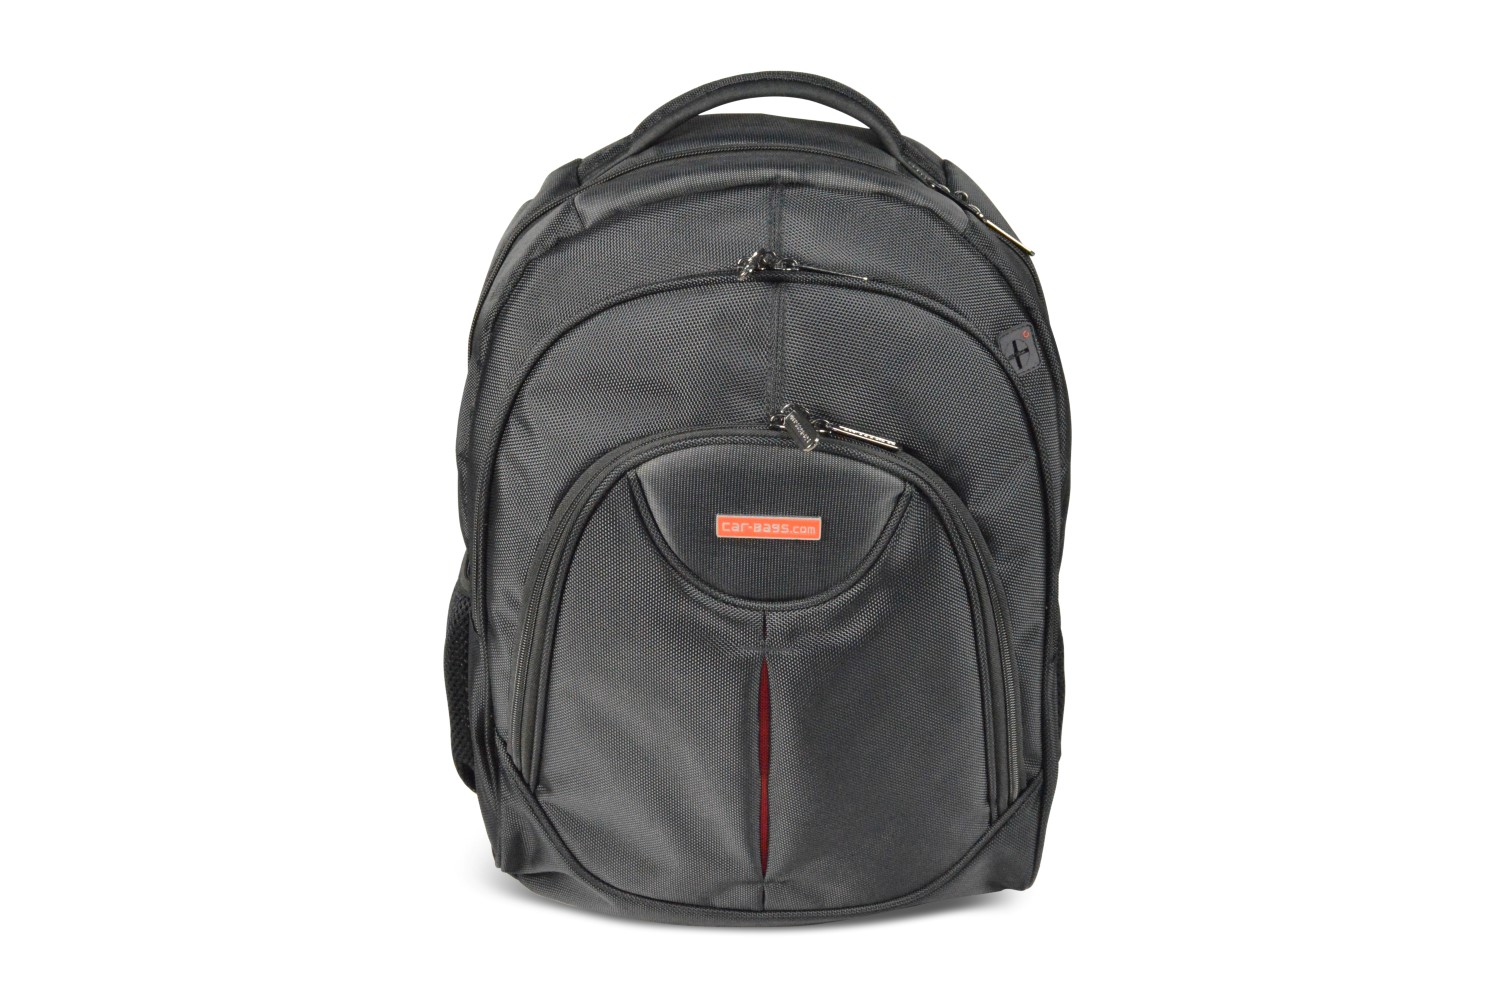 Backpack Trekking - suitable for laptop